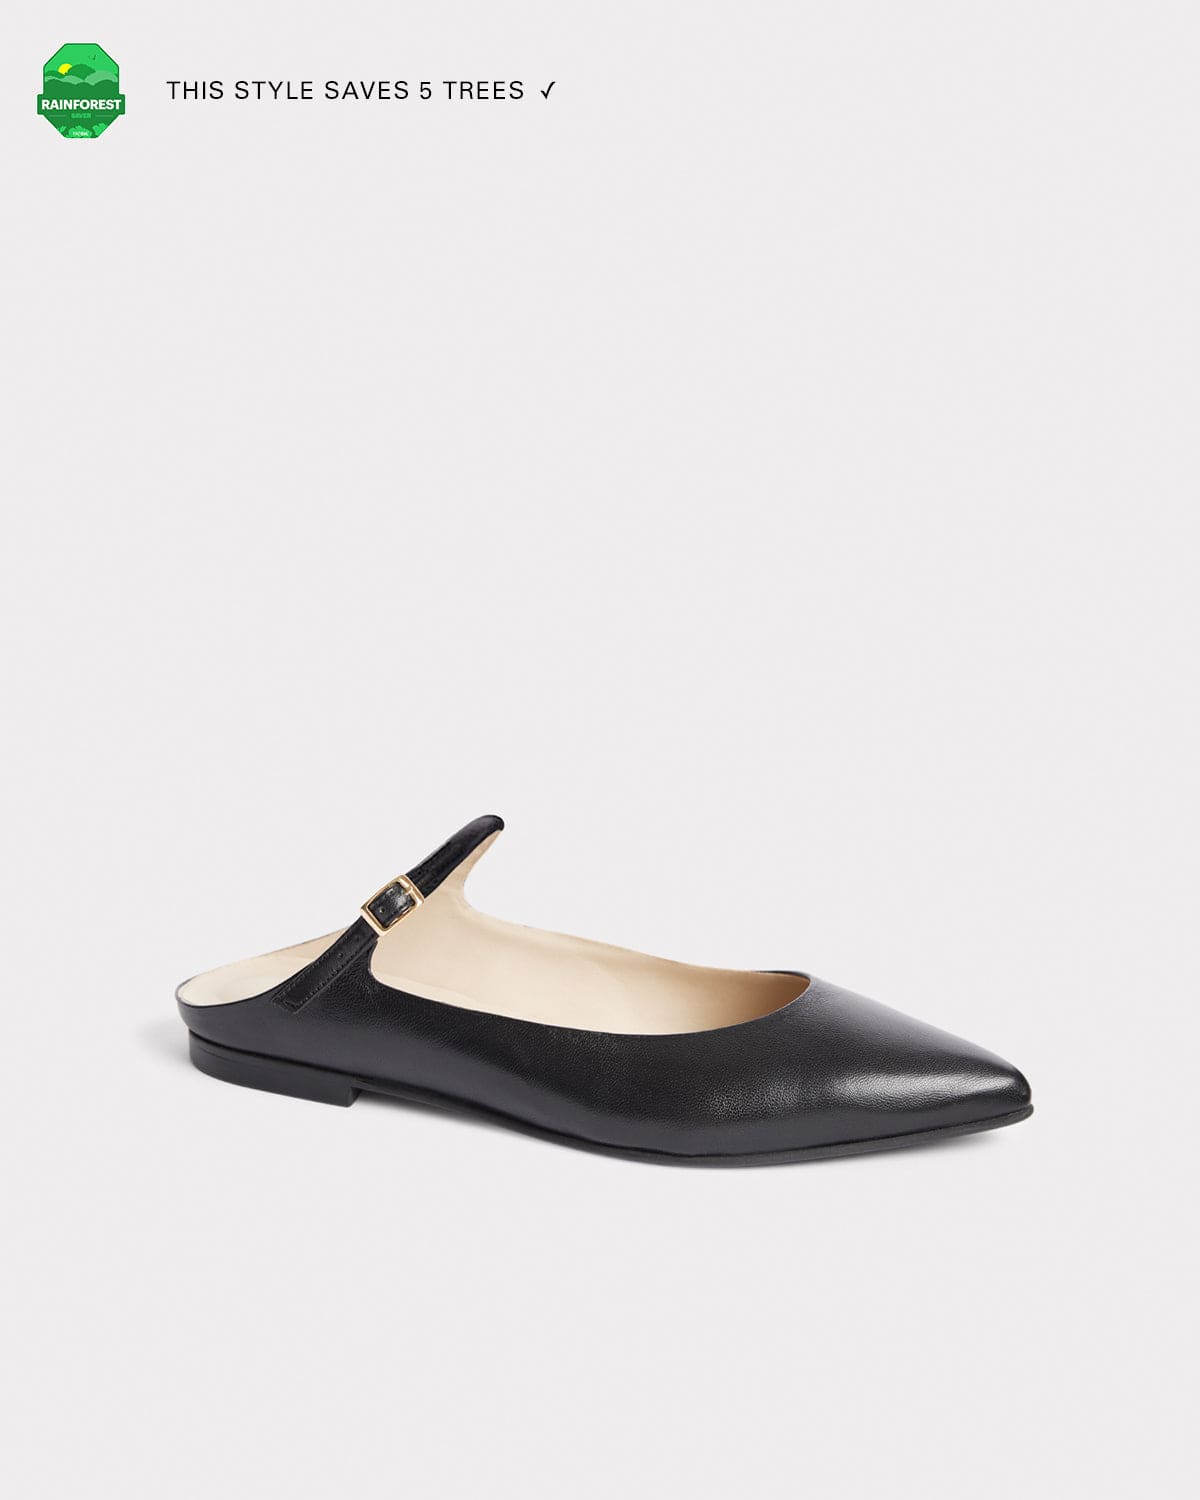 black leather pointed toe mary jane made from sustainable materials